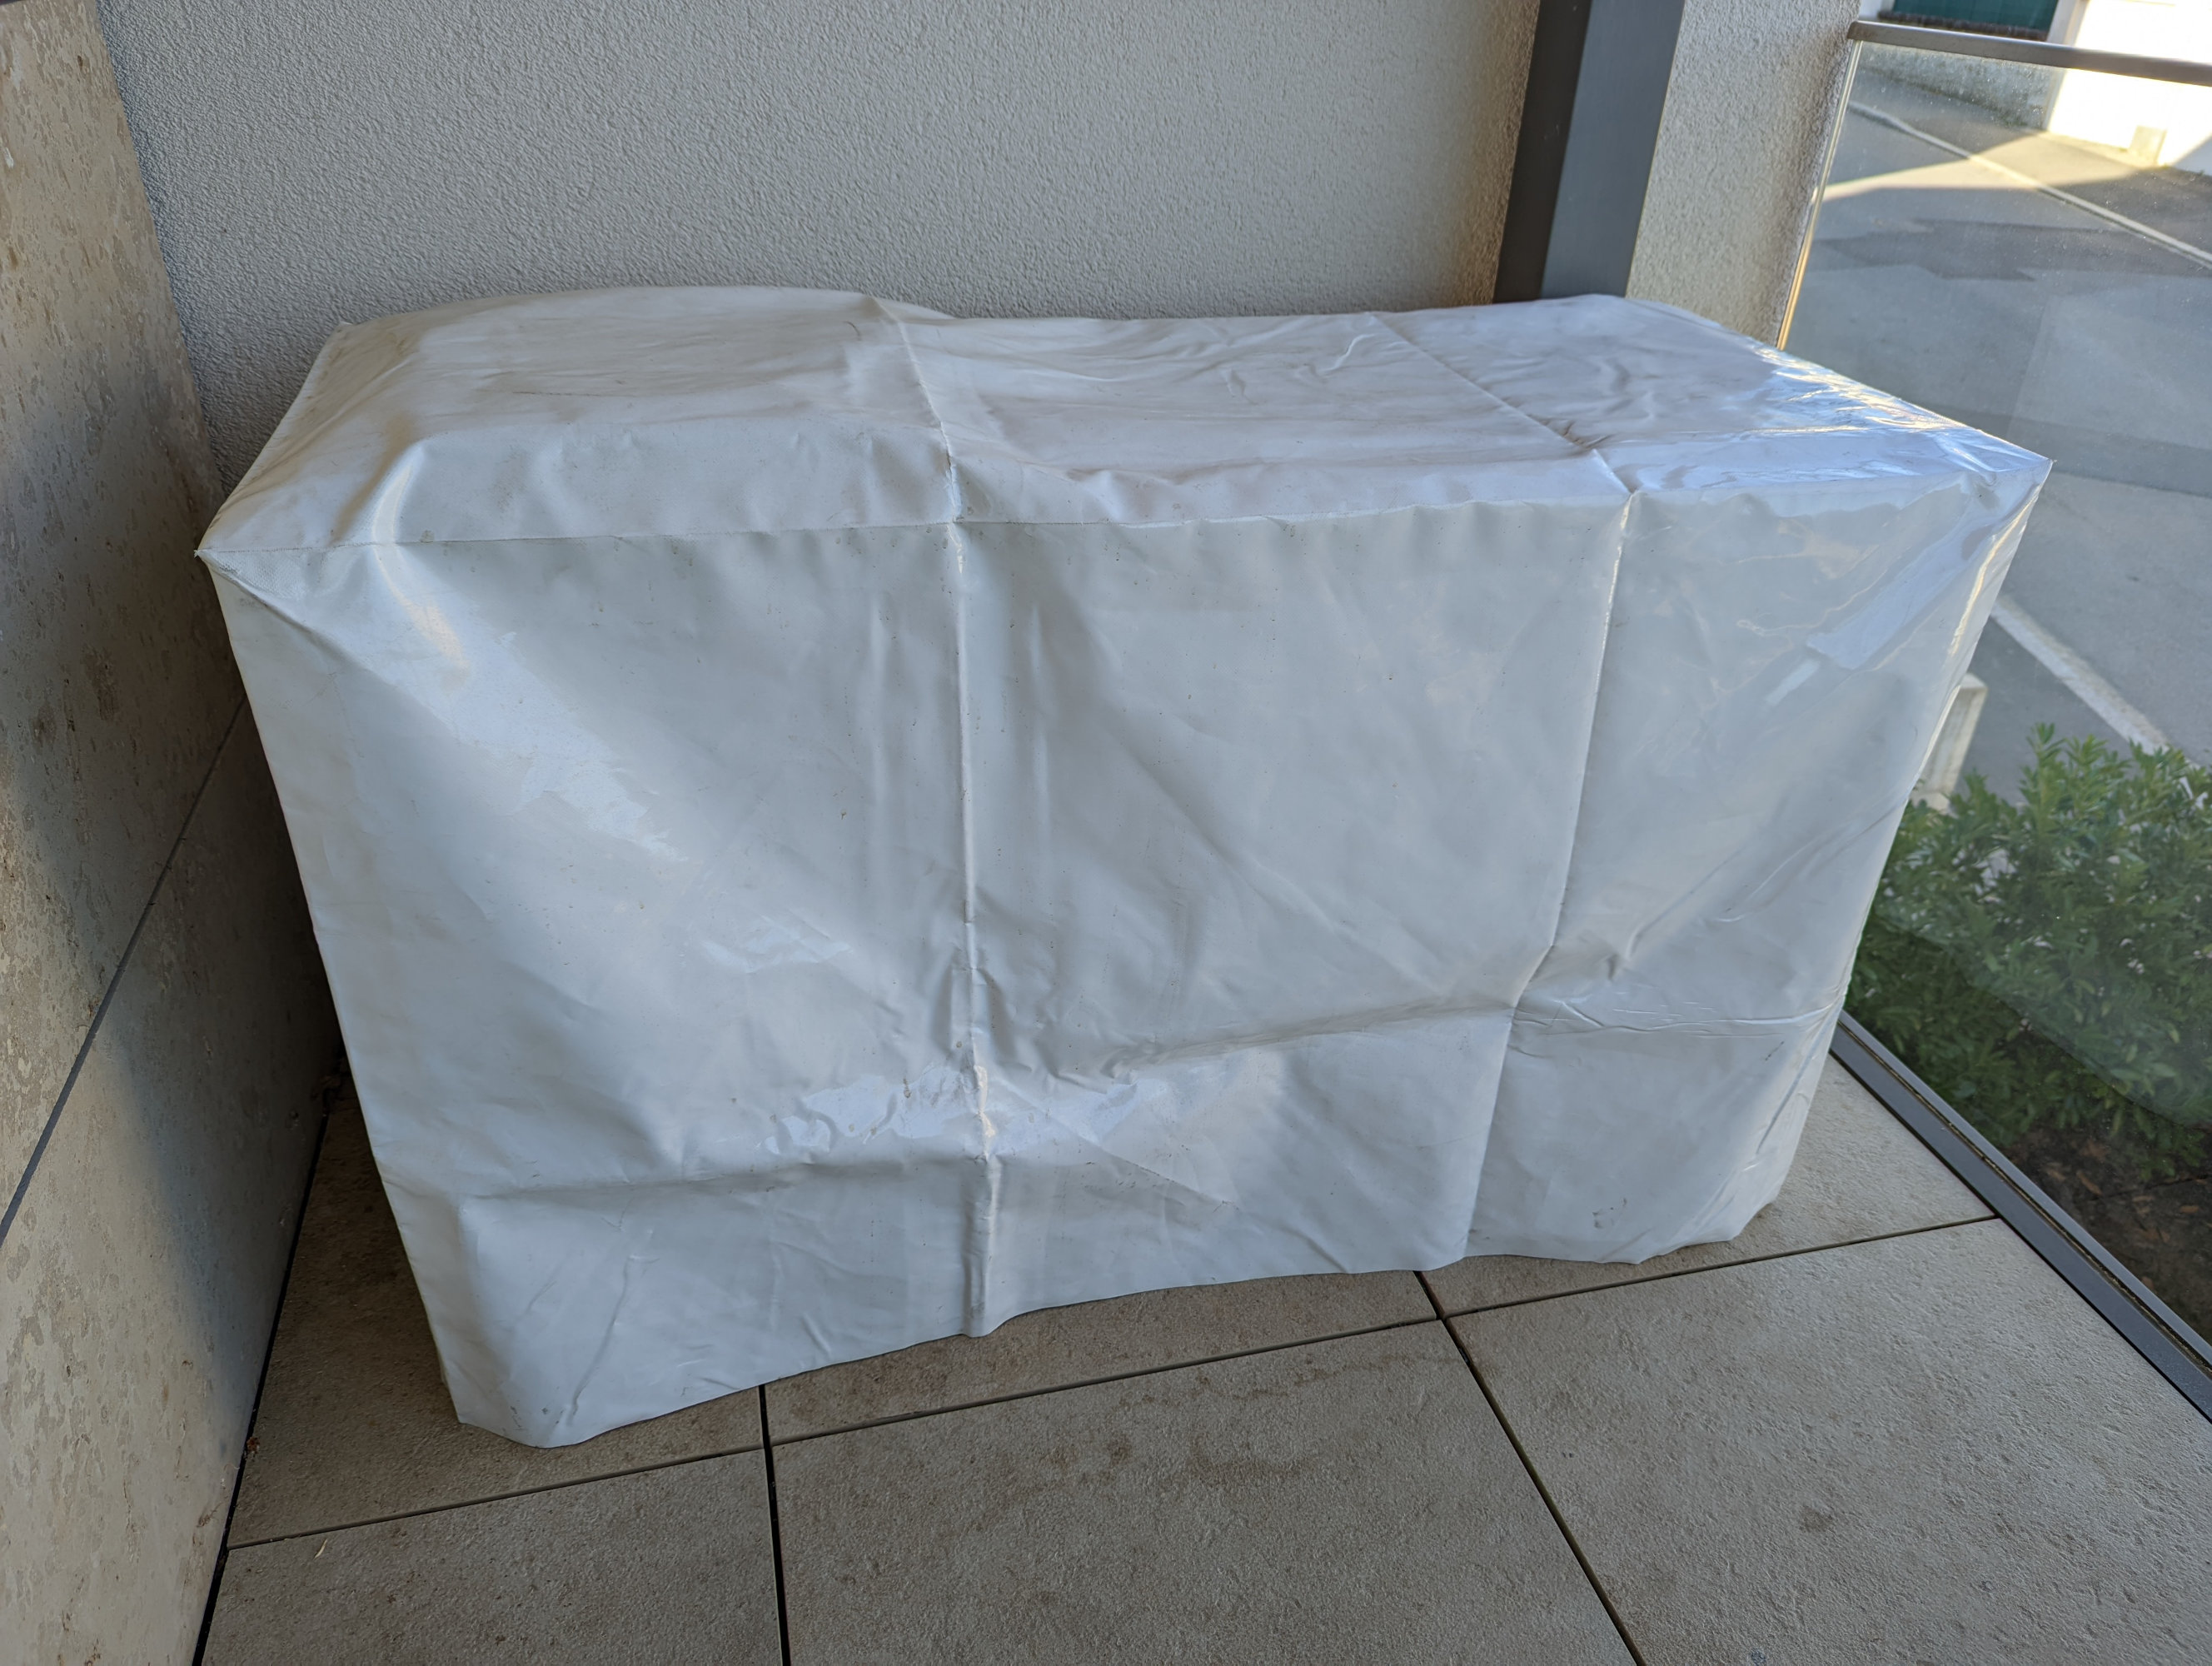 A photo of a white vinyl furniture cover placed over the top of the outdoor cooking station.